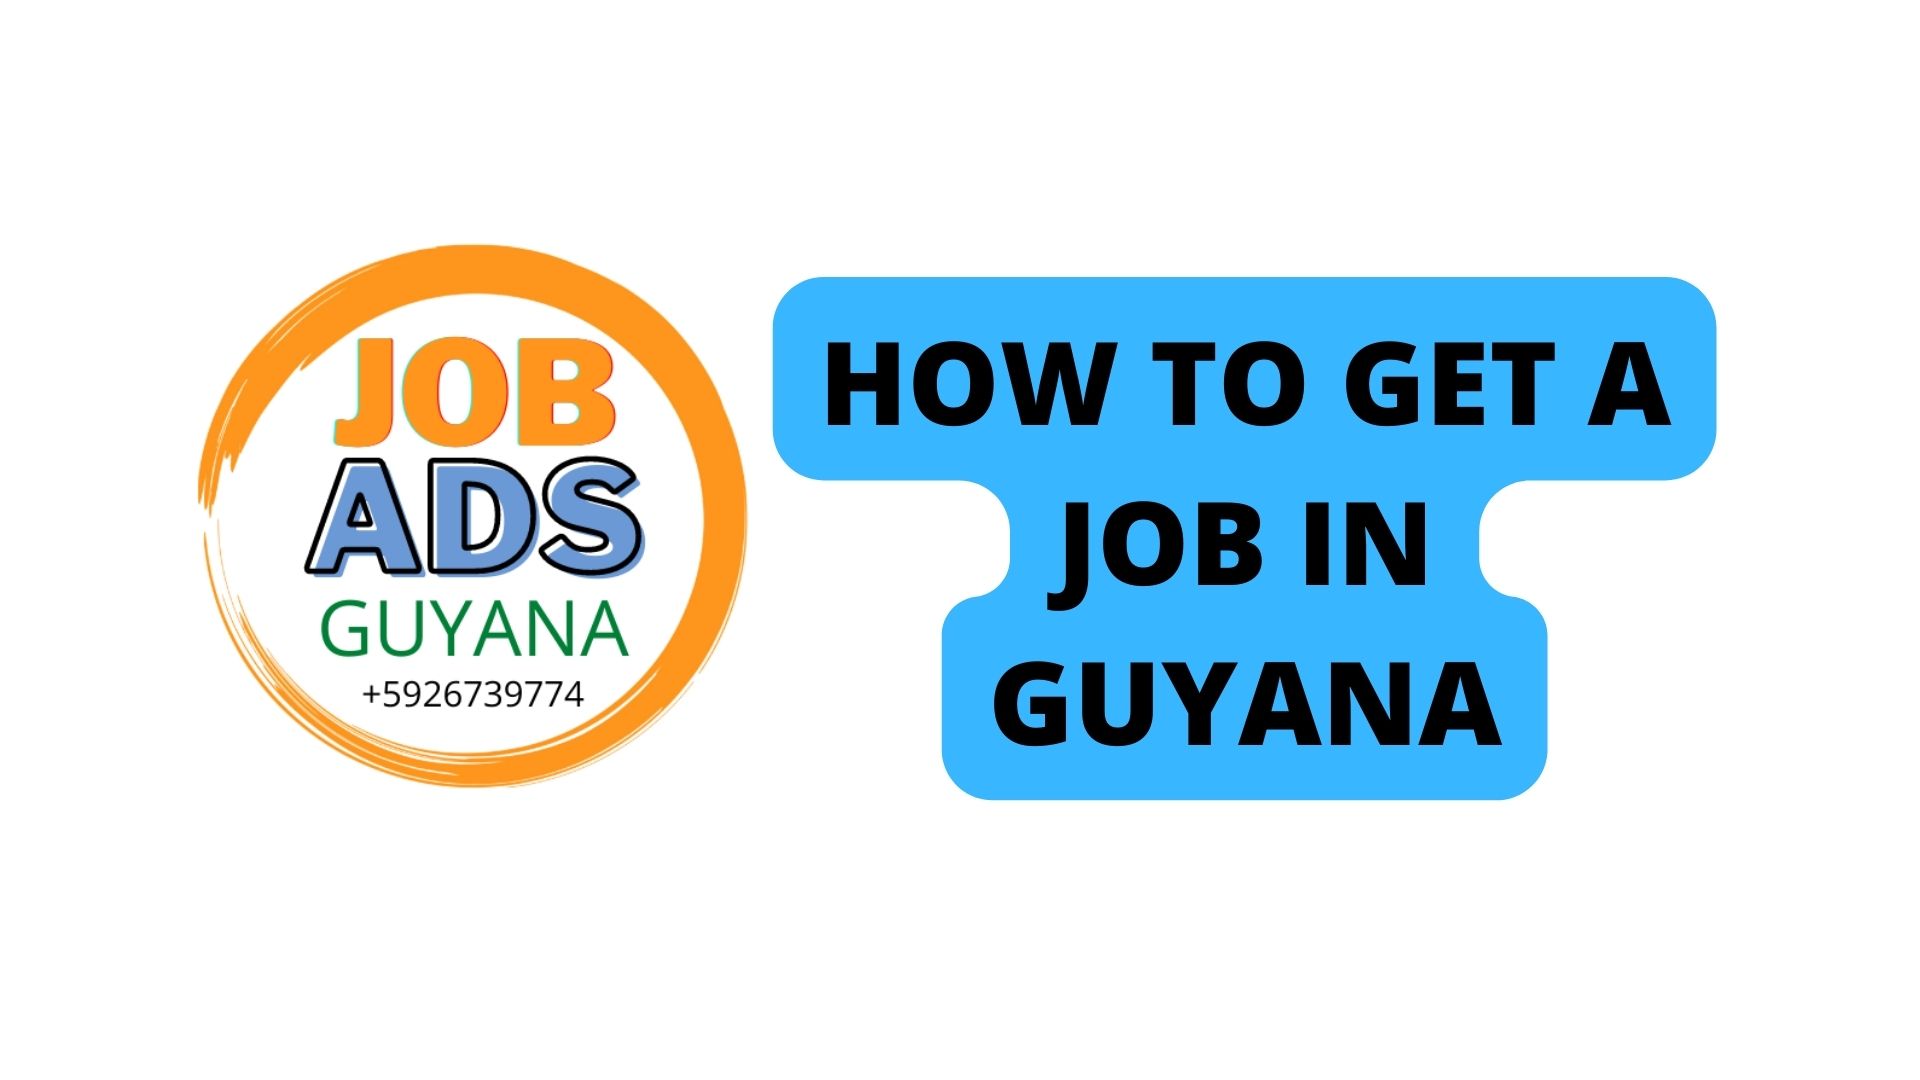 HOW TO GET A JOB IN GUYANA